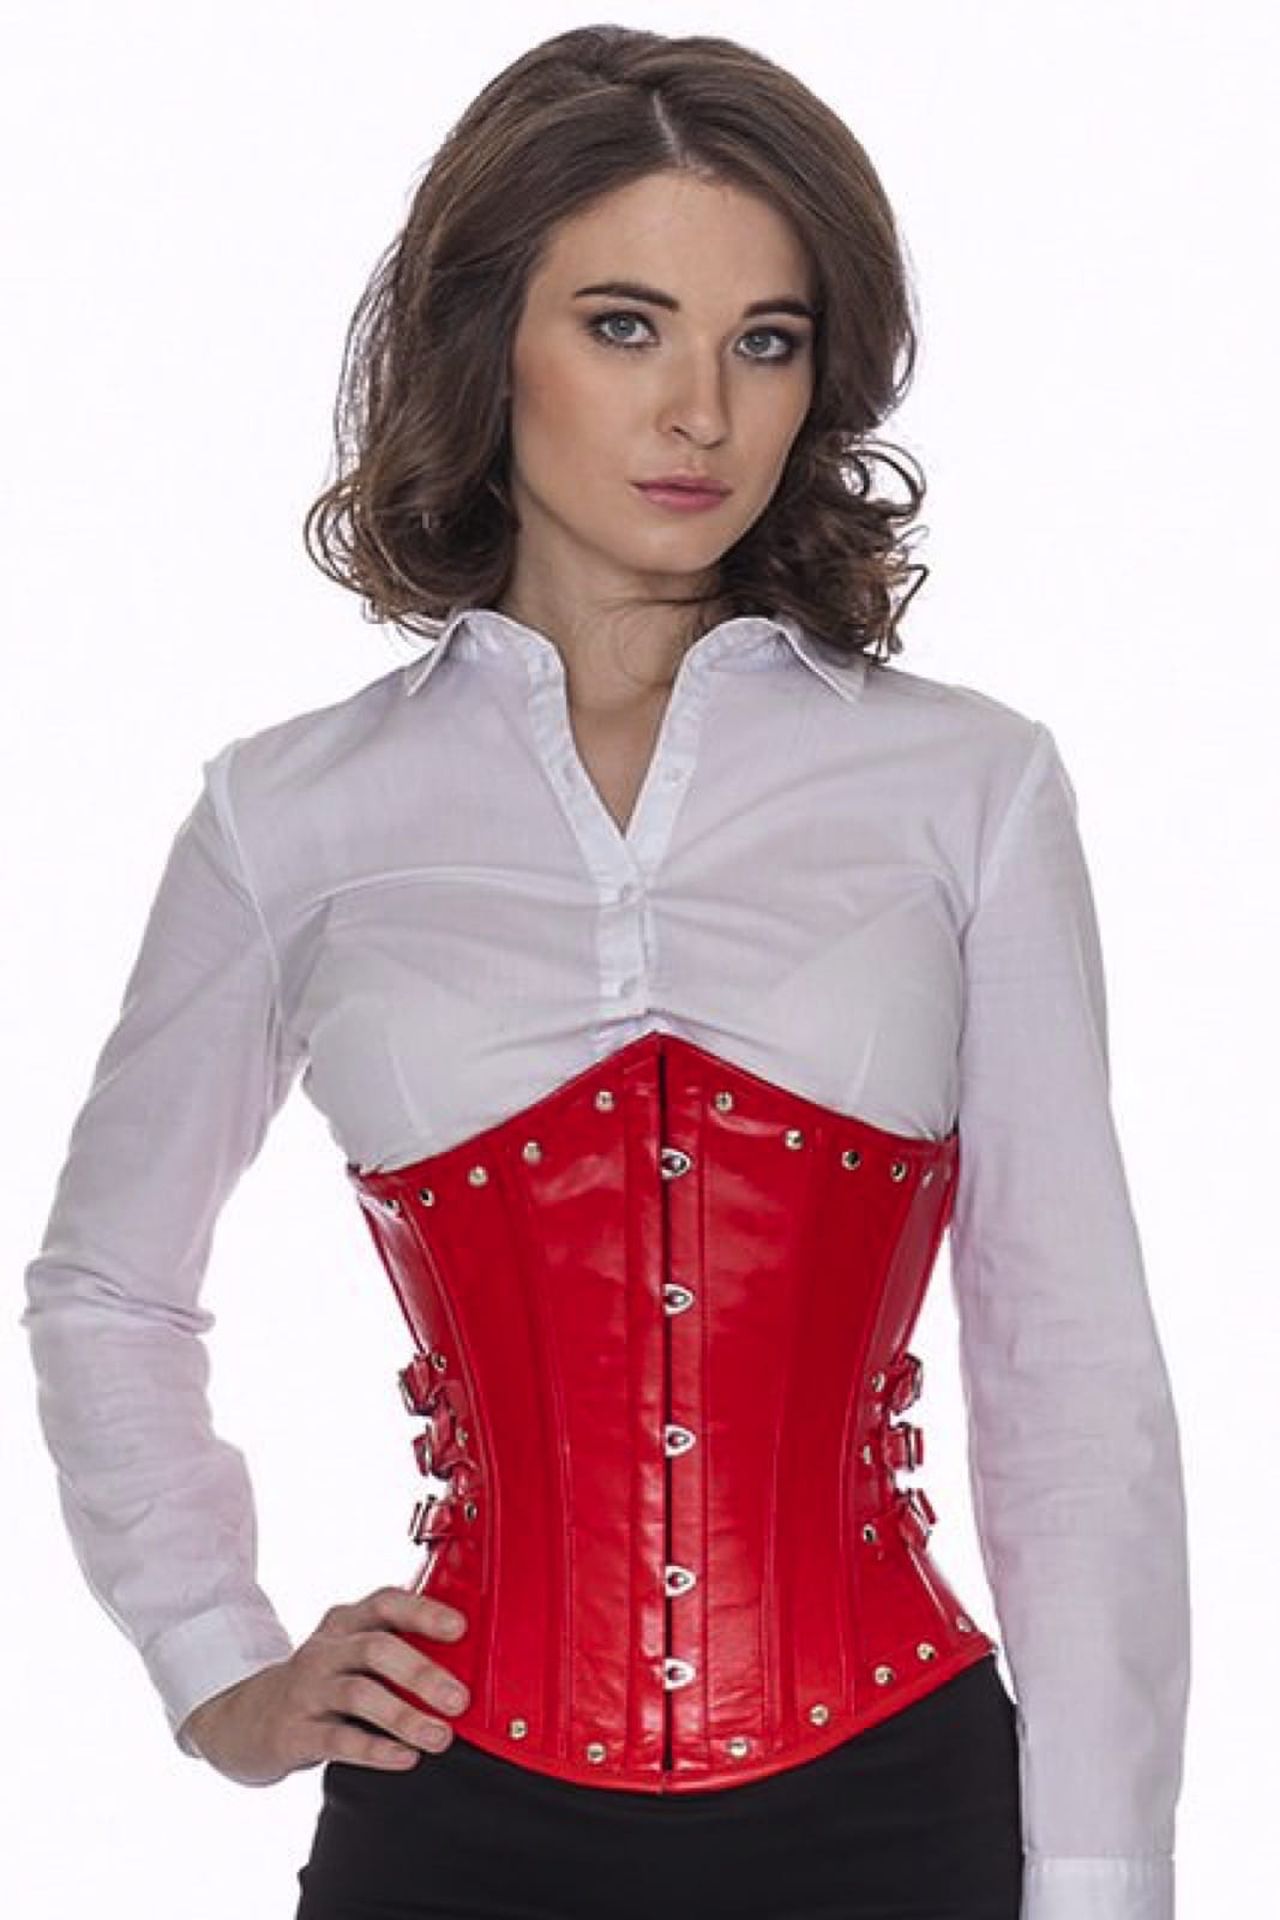 Corset red leather underbust with rivets and side buckles lg23